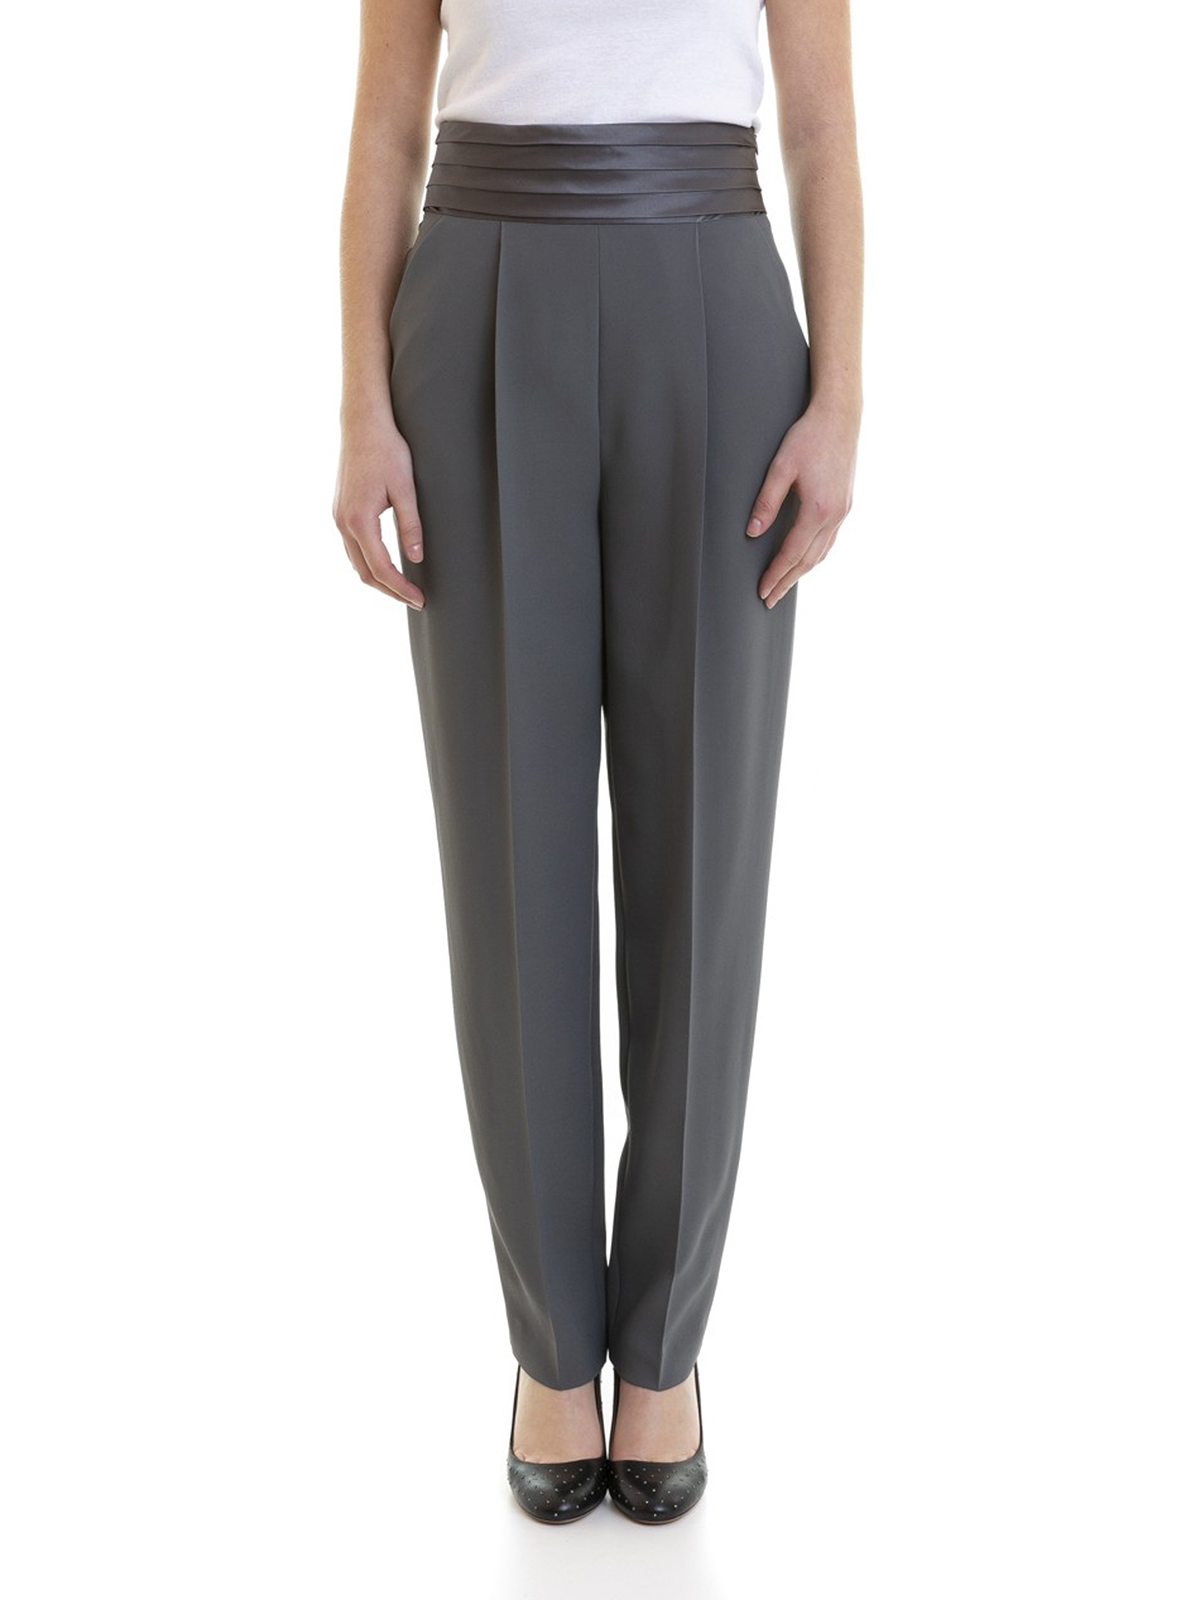 Tailored & Formal trousers Emporio Armani - Grey tuxedo trousers -  2NP47T22013634